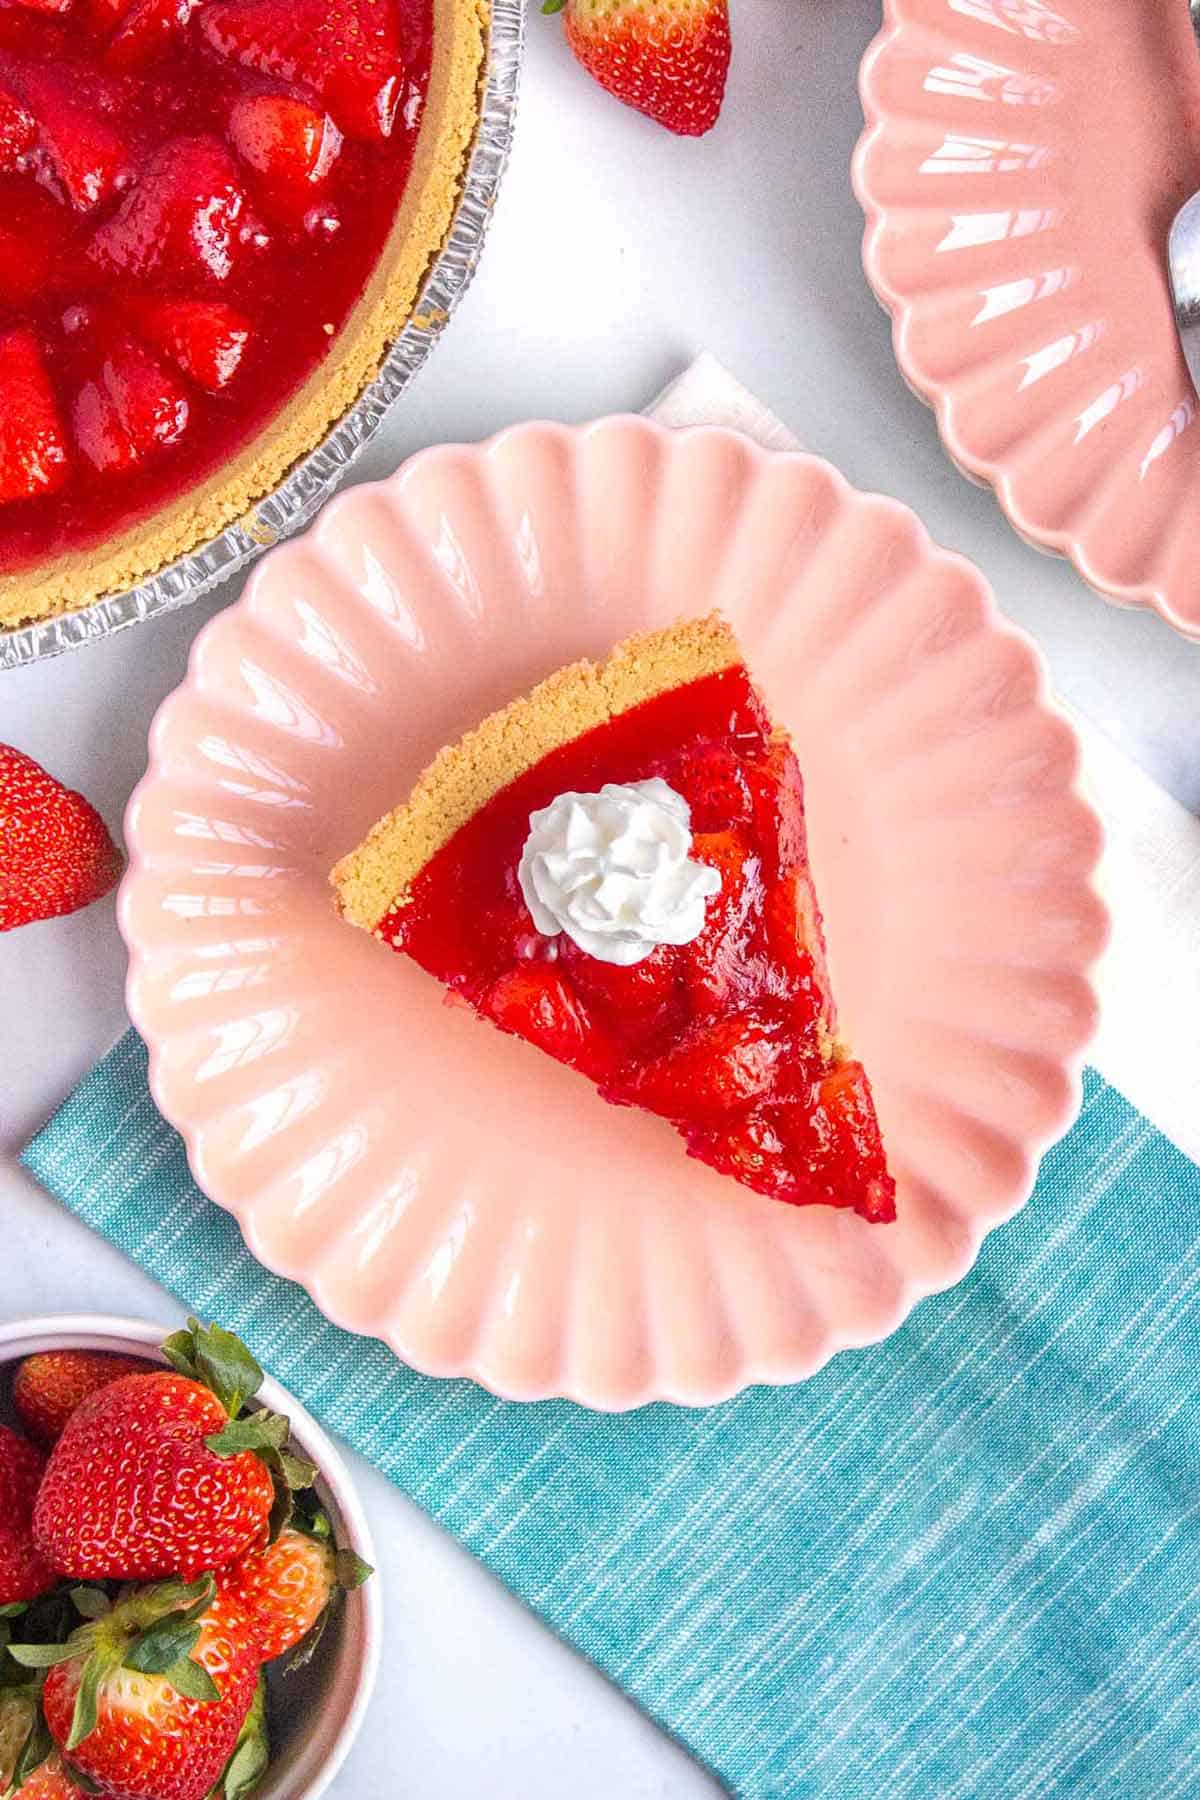 Slice of strawberry jello pie topped with a dollop of whipped cream.